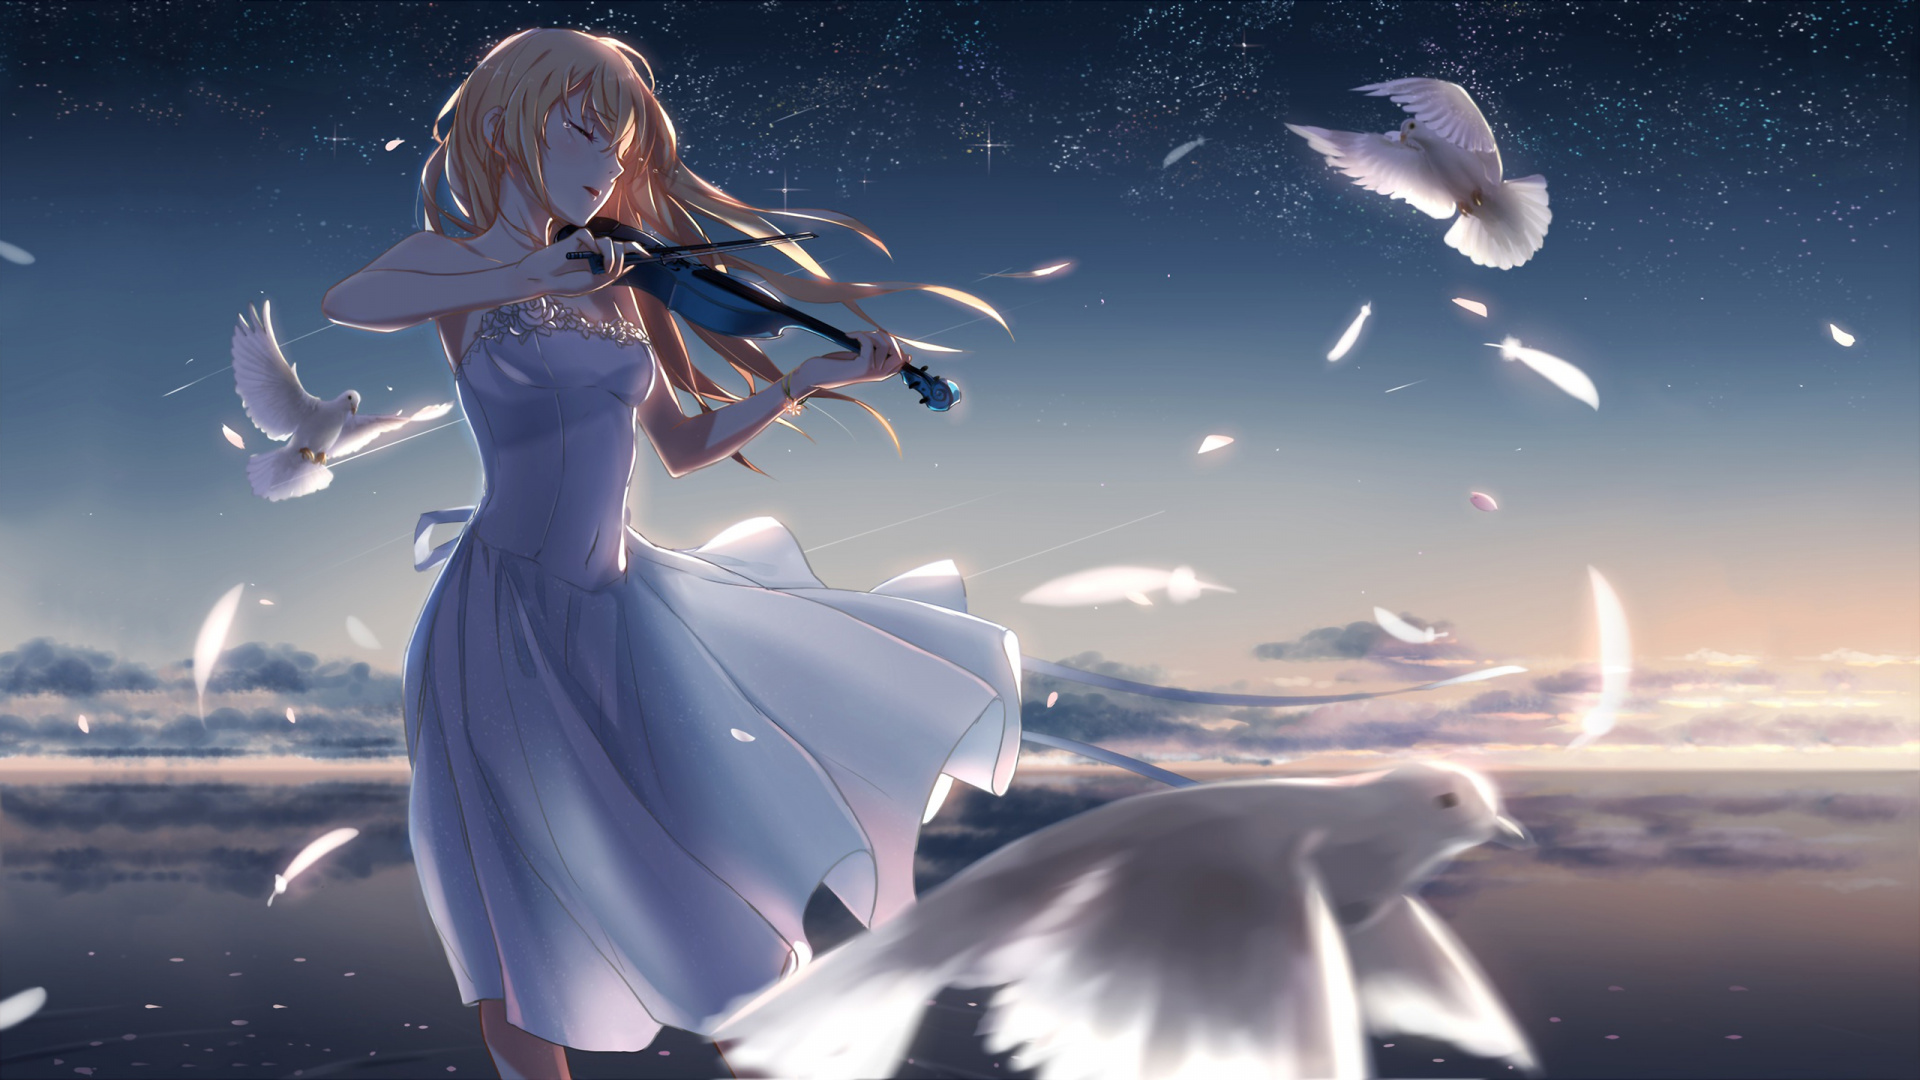 Woman in White Dress Anime Character. Wallpaper in 1920x1080 Resolution